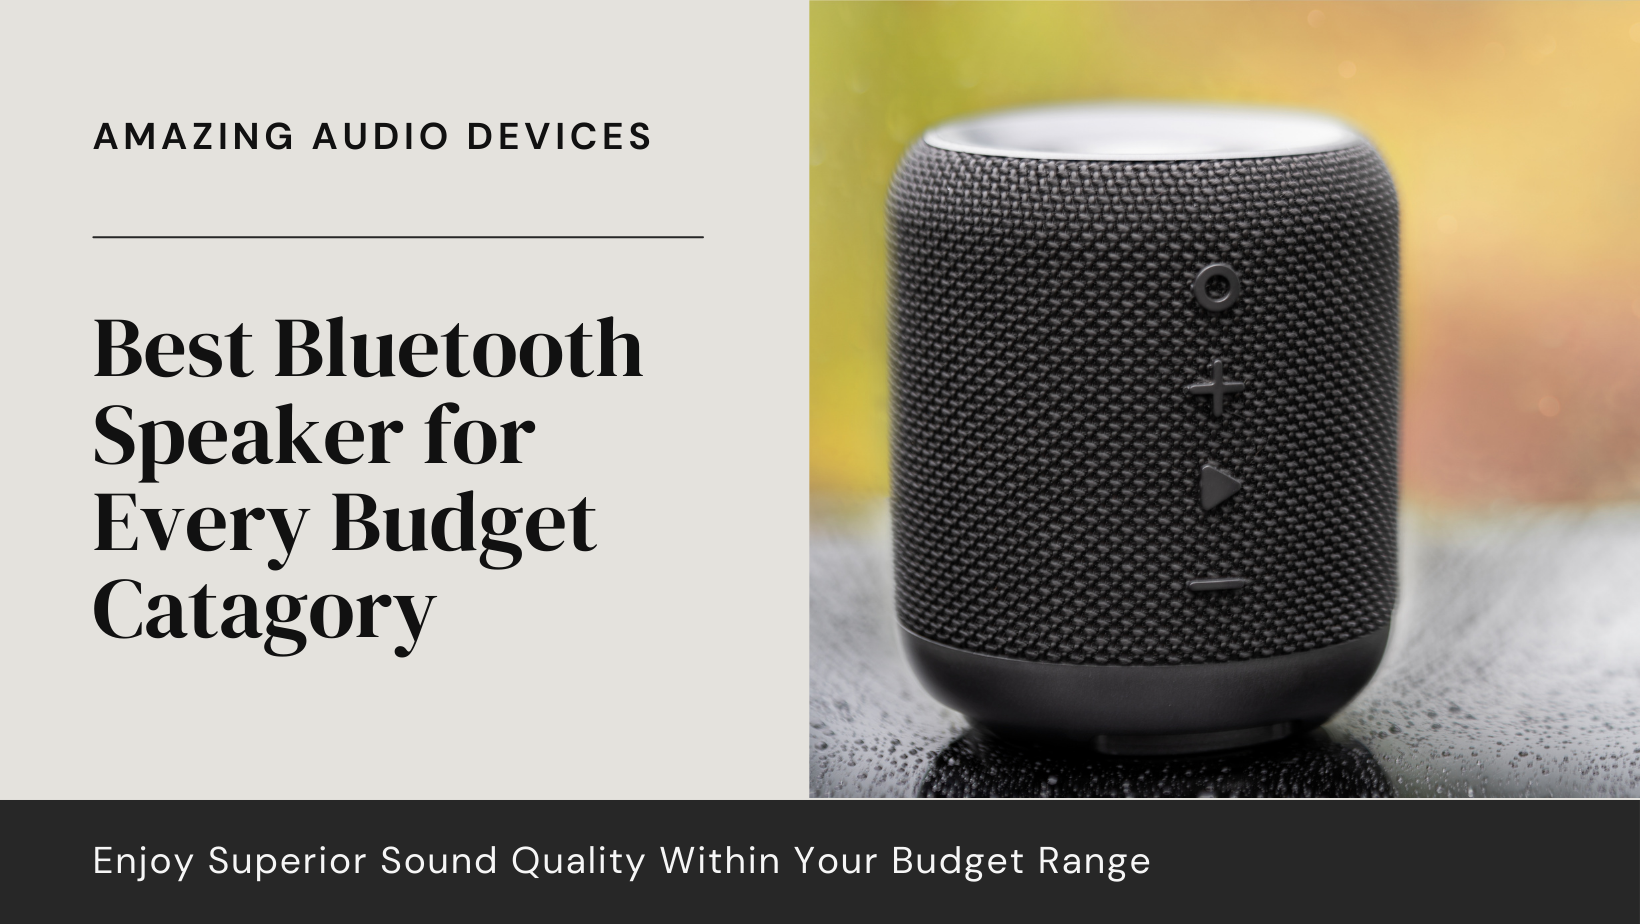 Best Bluetooth Speaker for Every Budget Category